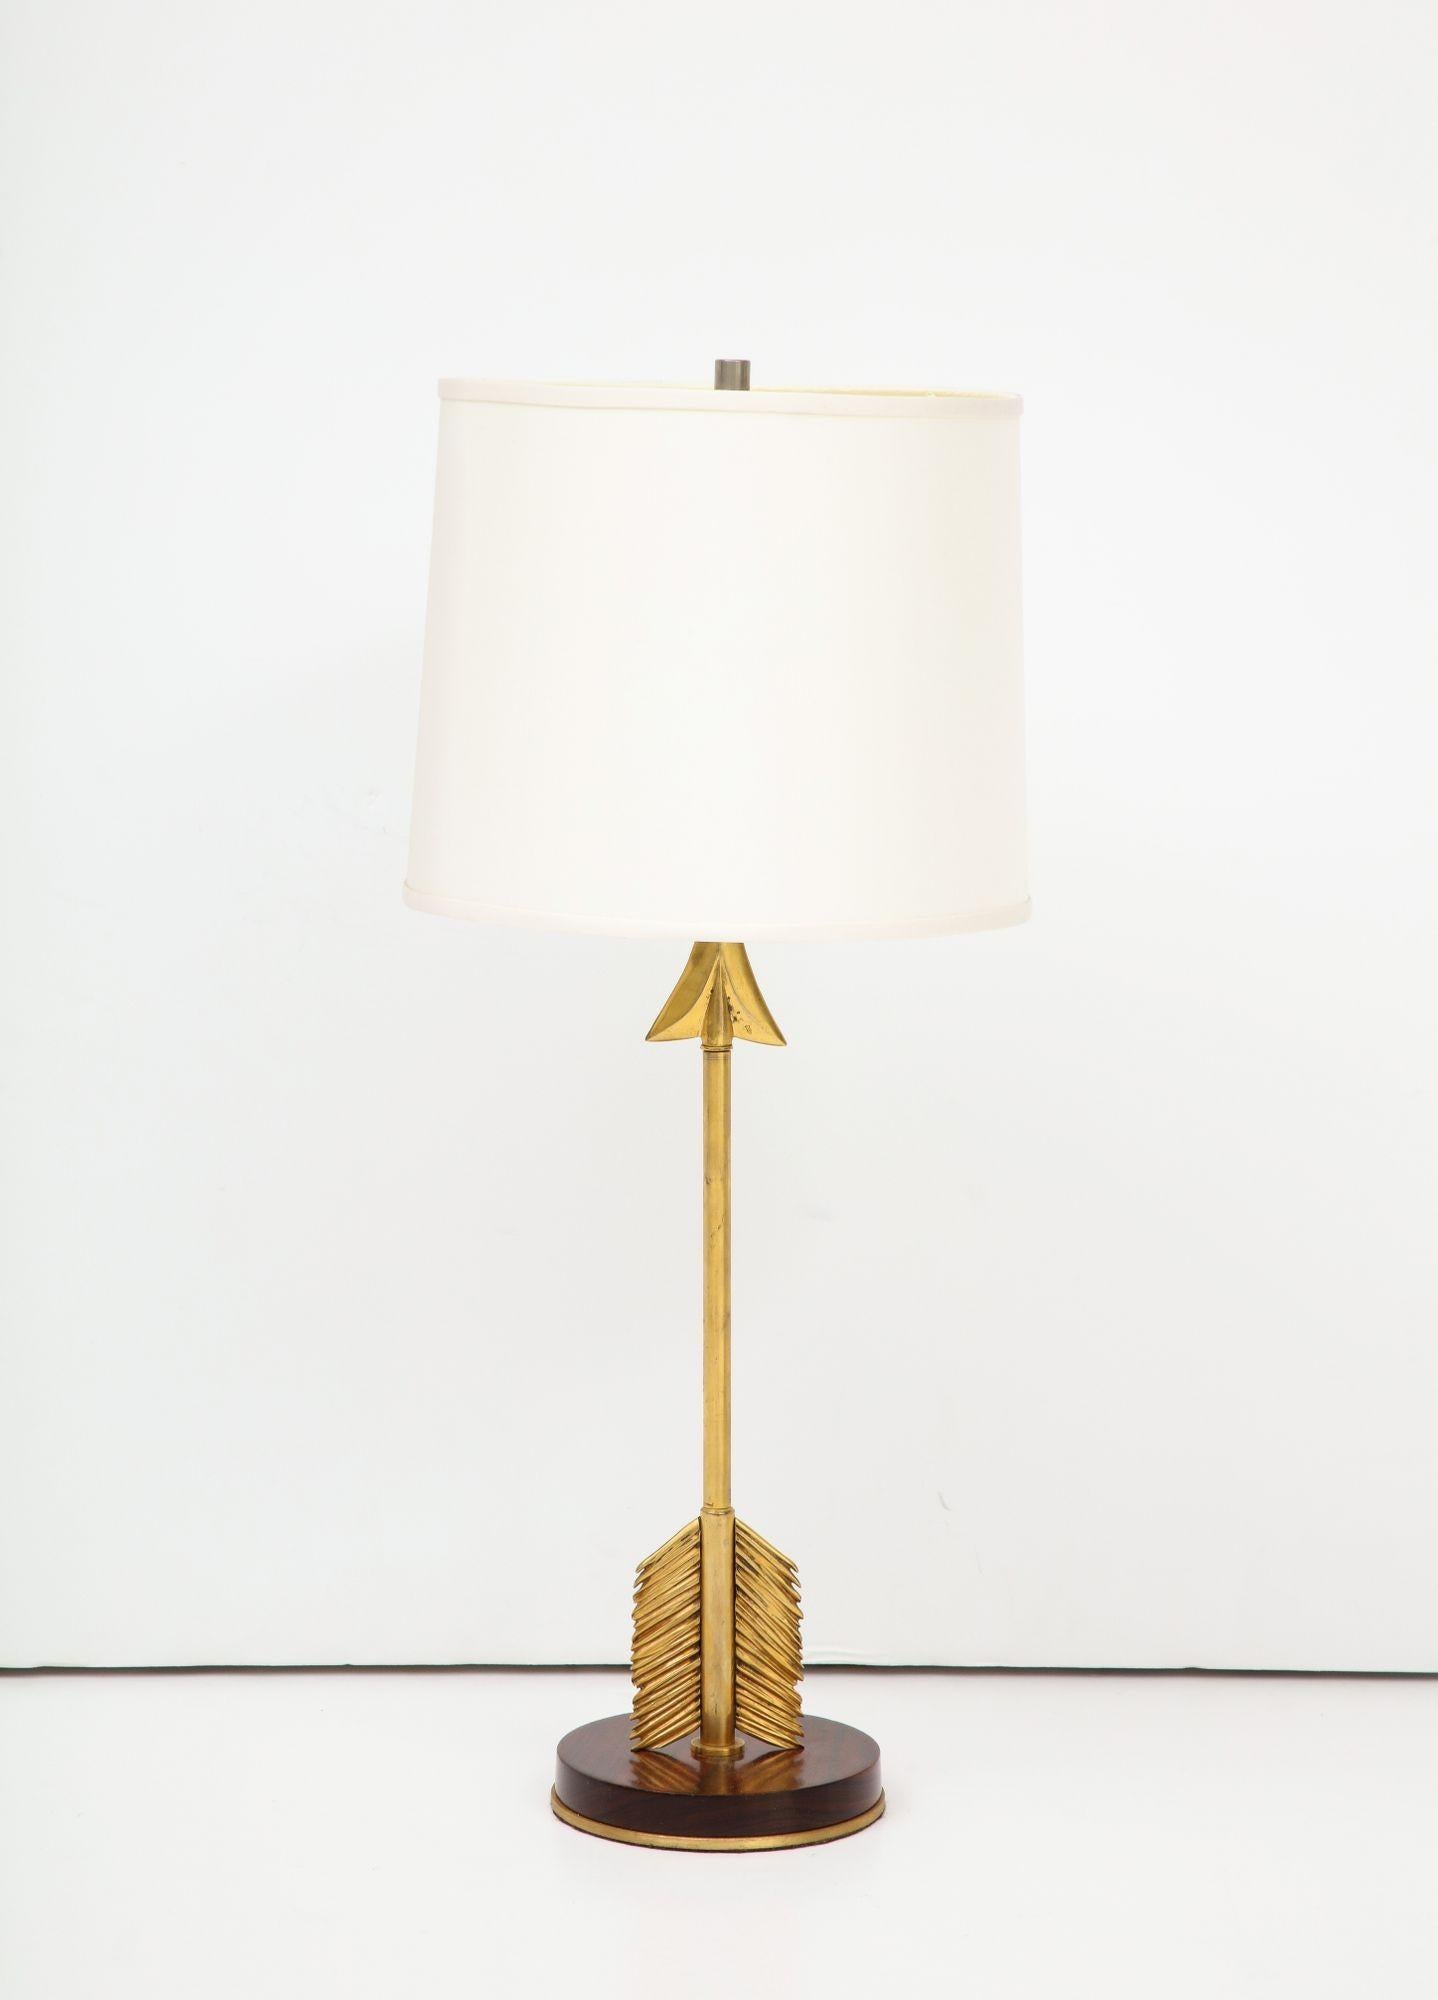 Maison Jansen Retro pair of arrow table lamps in gilded bronze, mounted on circular mahogany wood bases, circa 1940s.